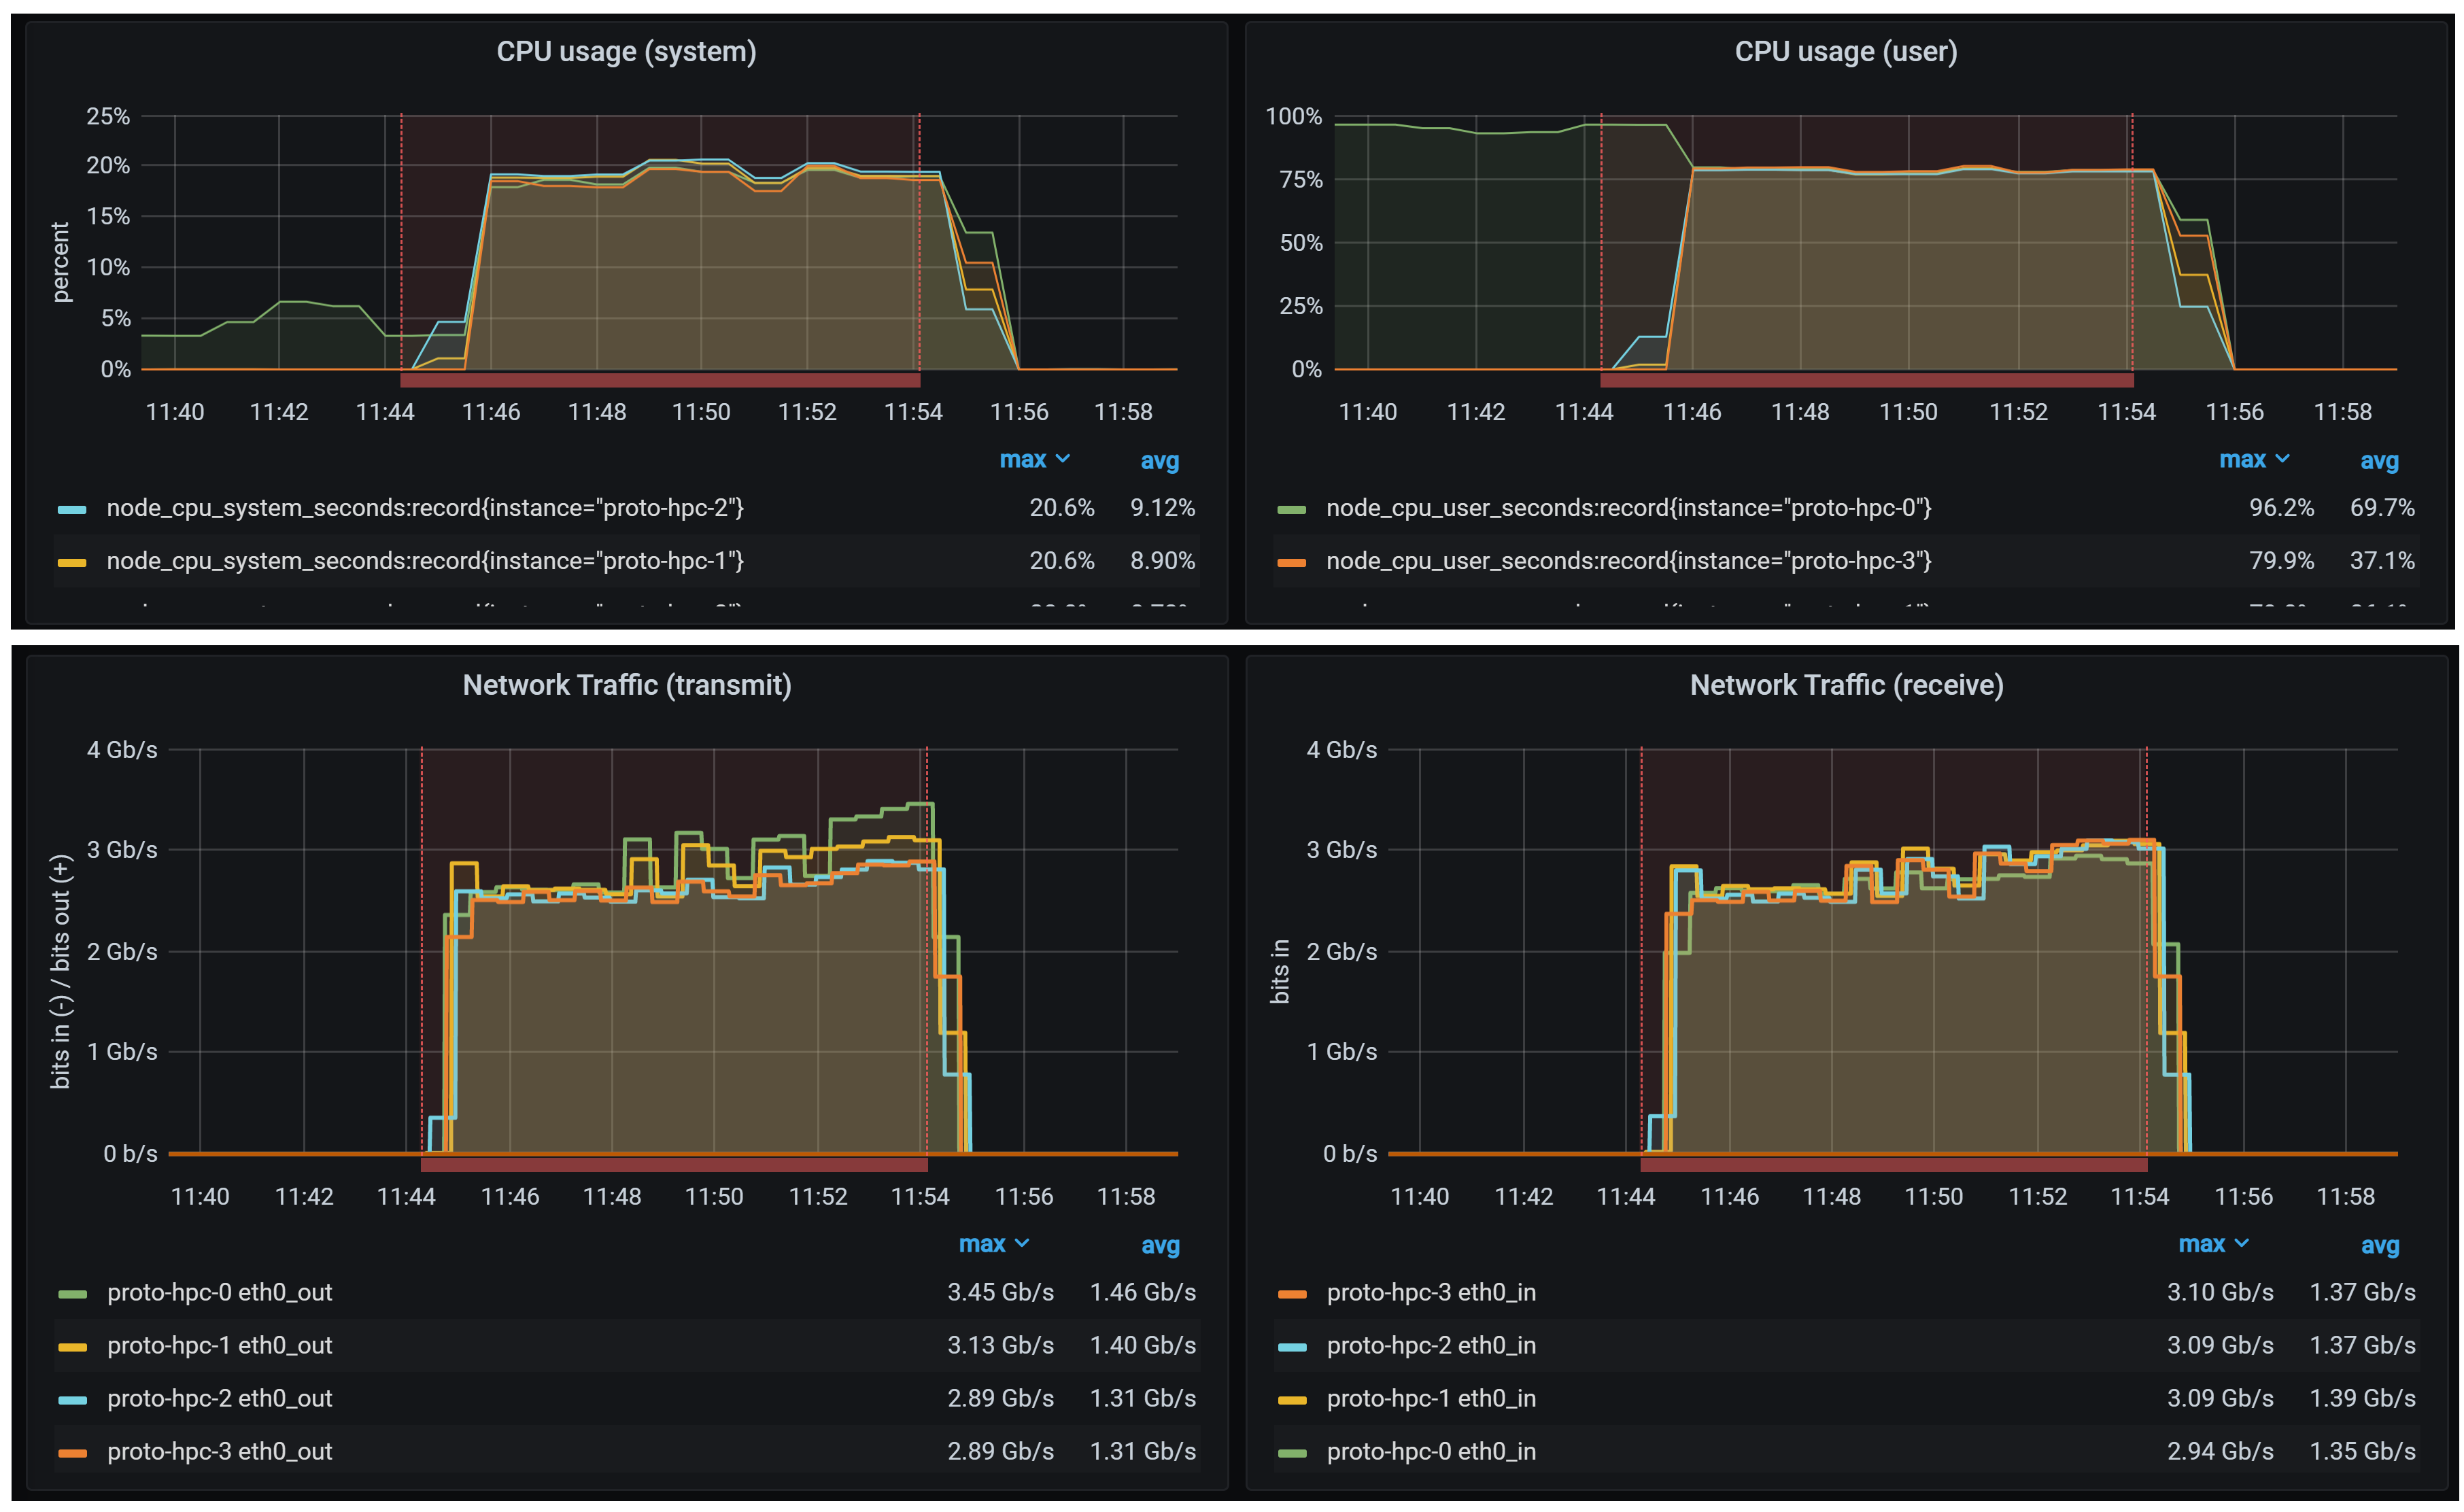 Slurm job details dashboard showing timeseries for CPU load and network traffic